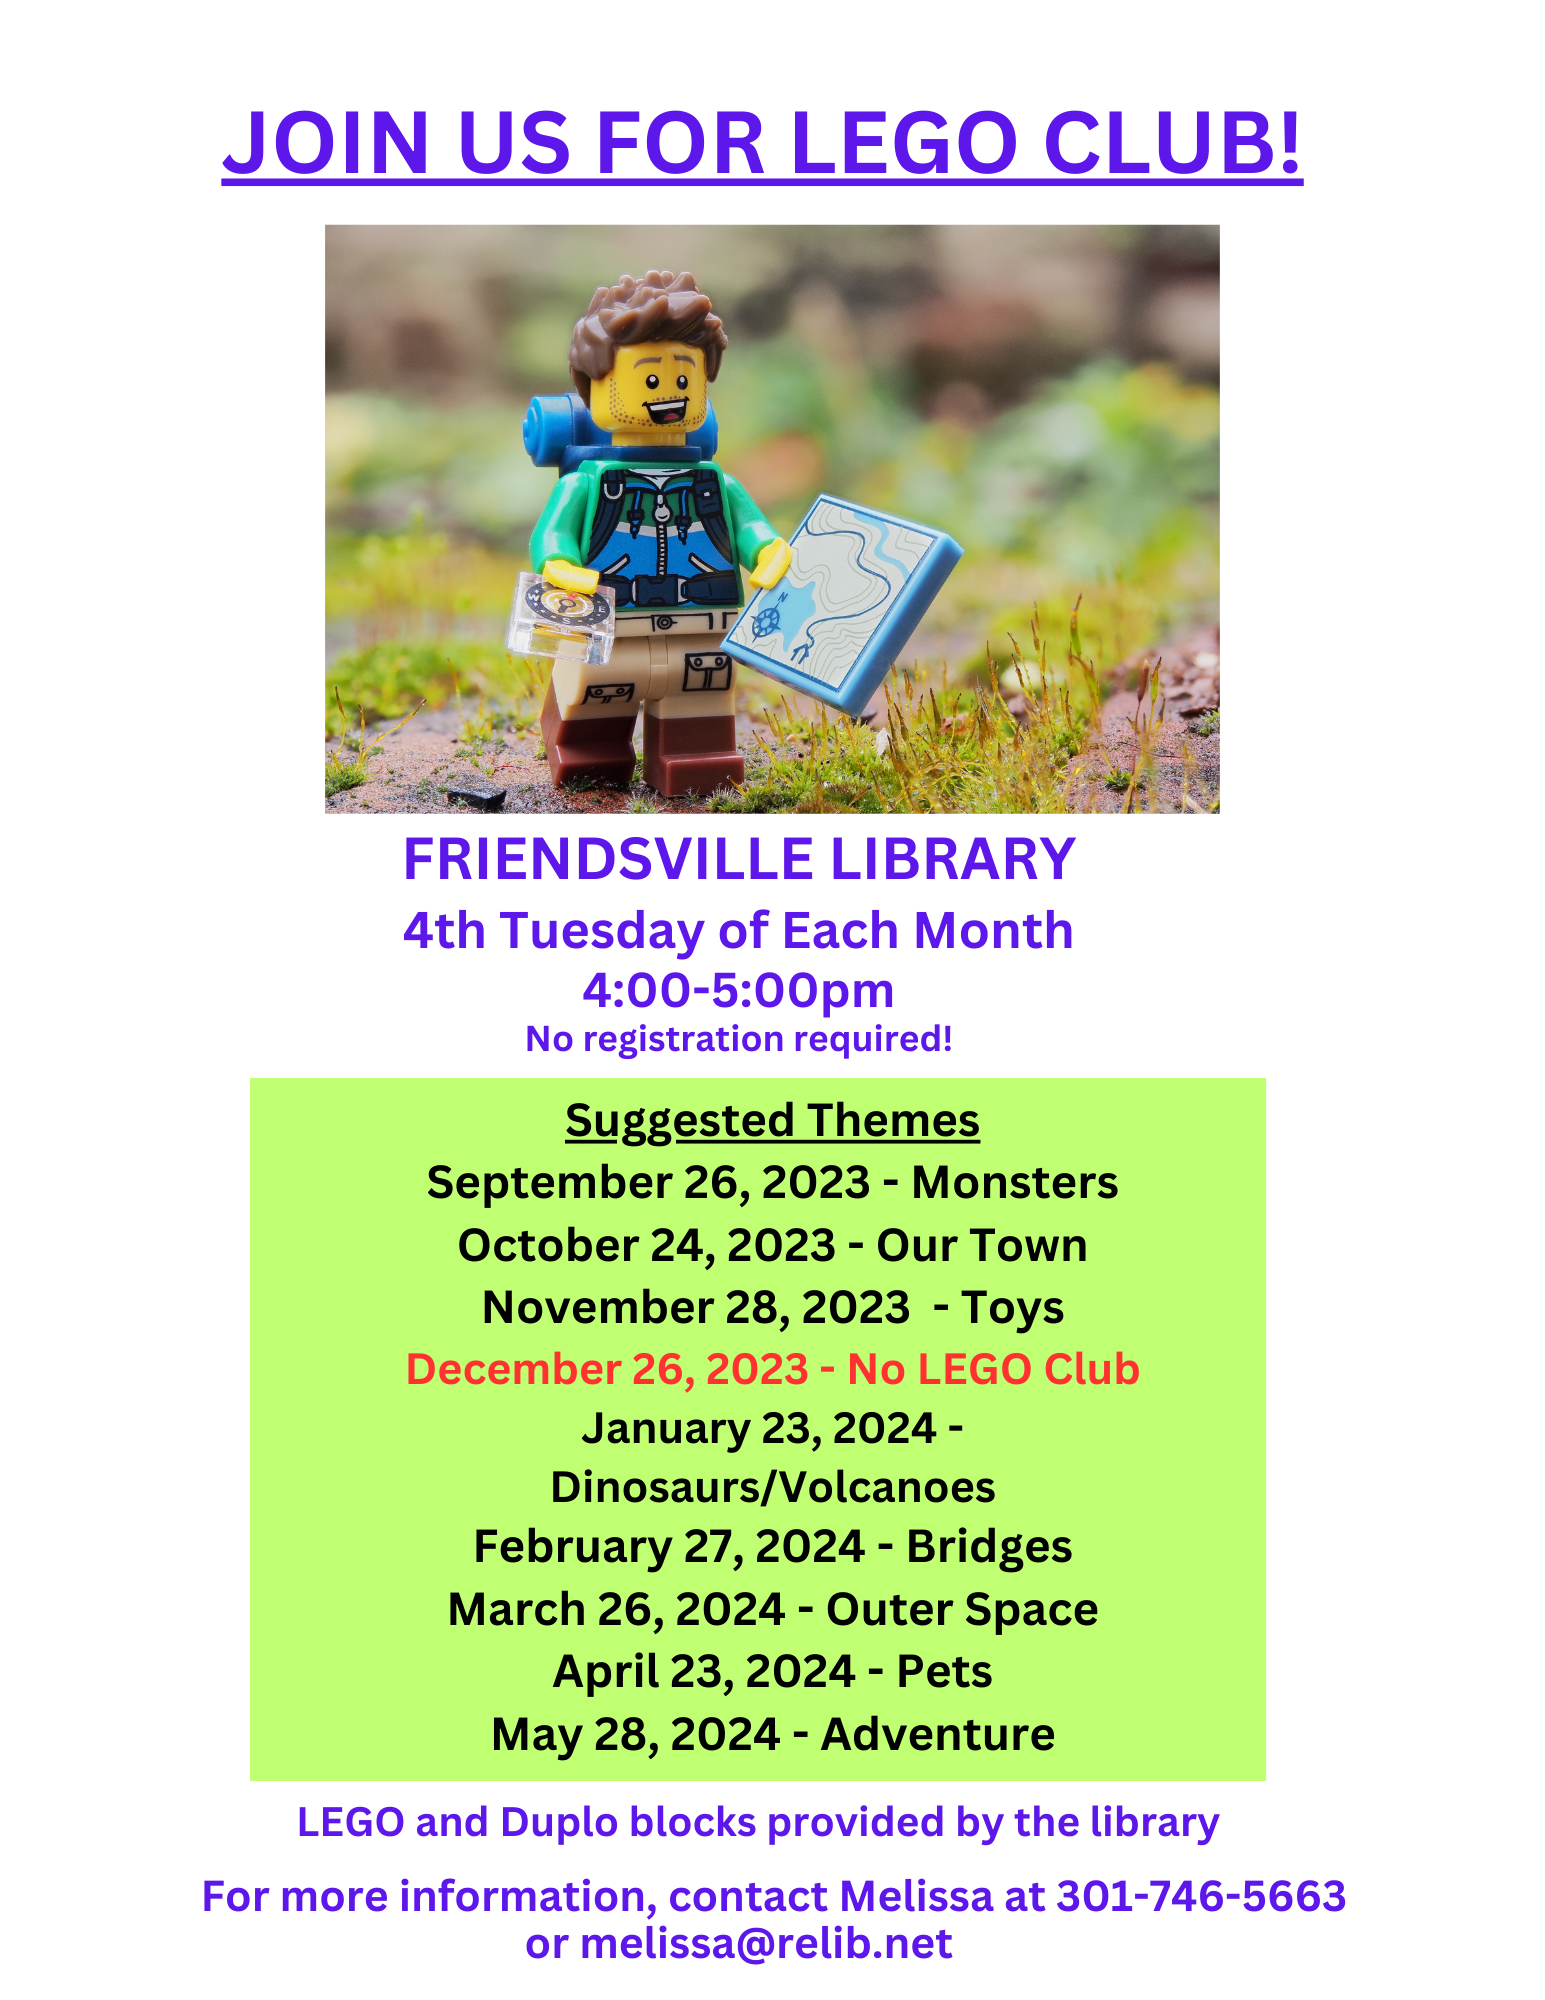 Flyer with information about LEGO Club at the Friendsville Library